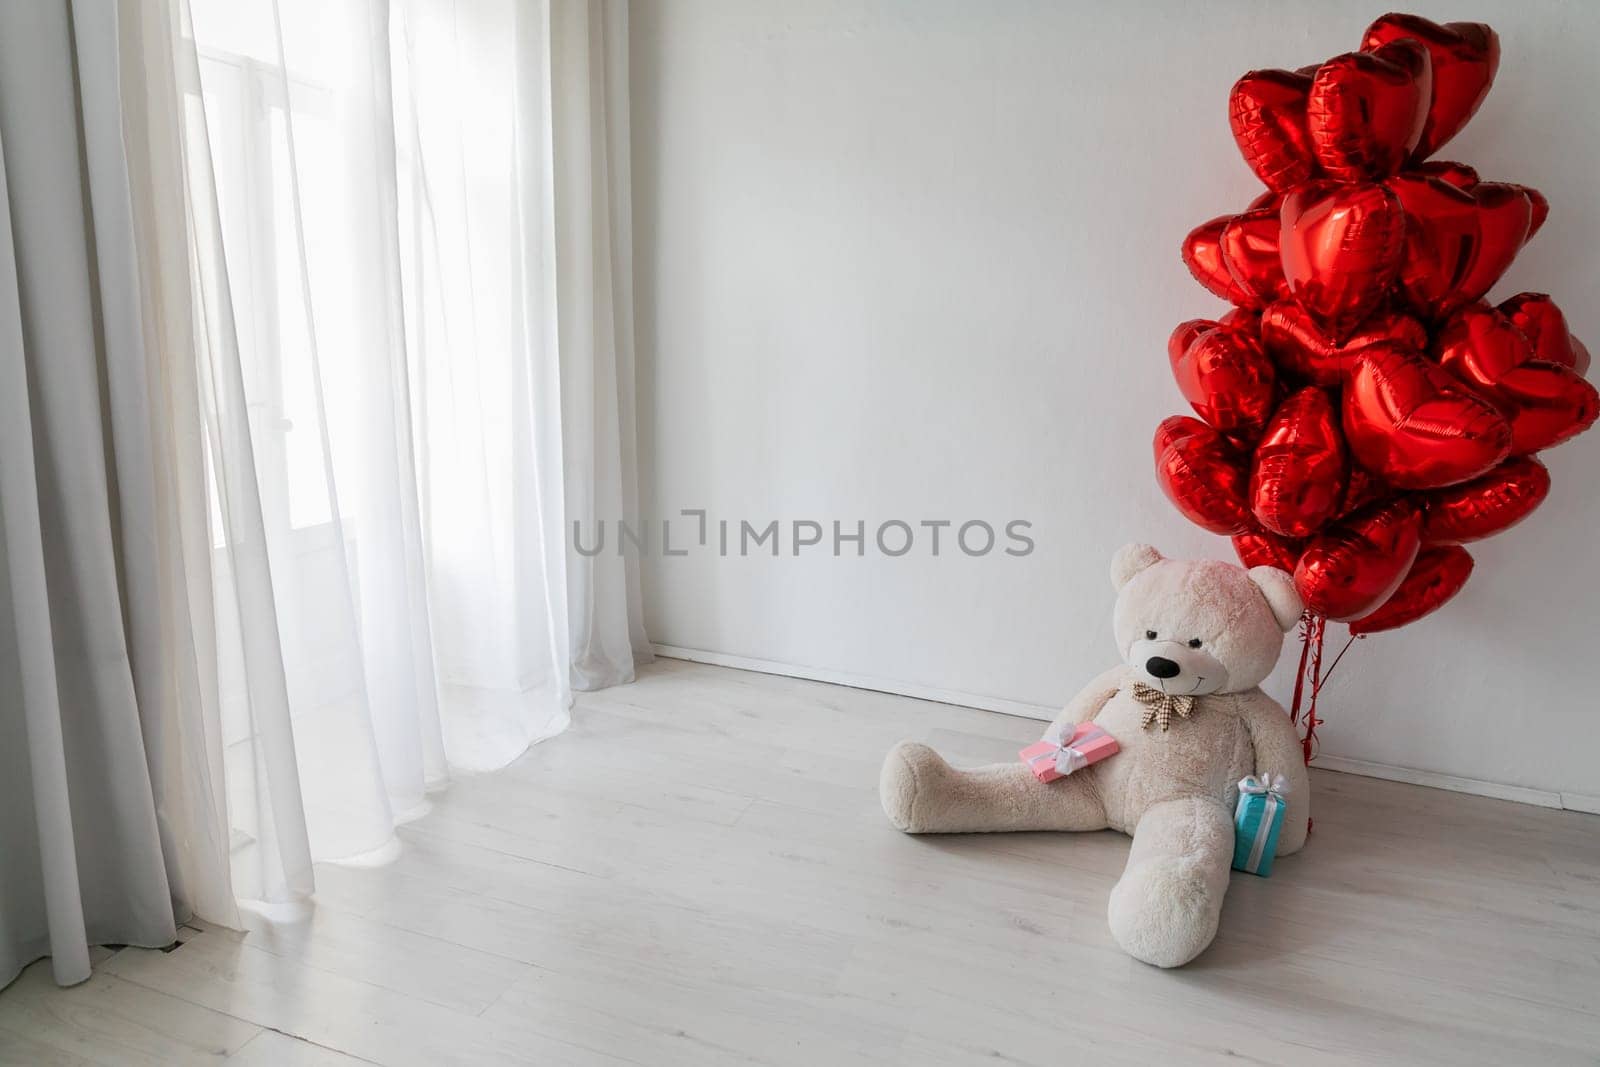 an Interior red balloons with soft toy and gifts